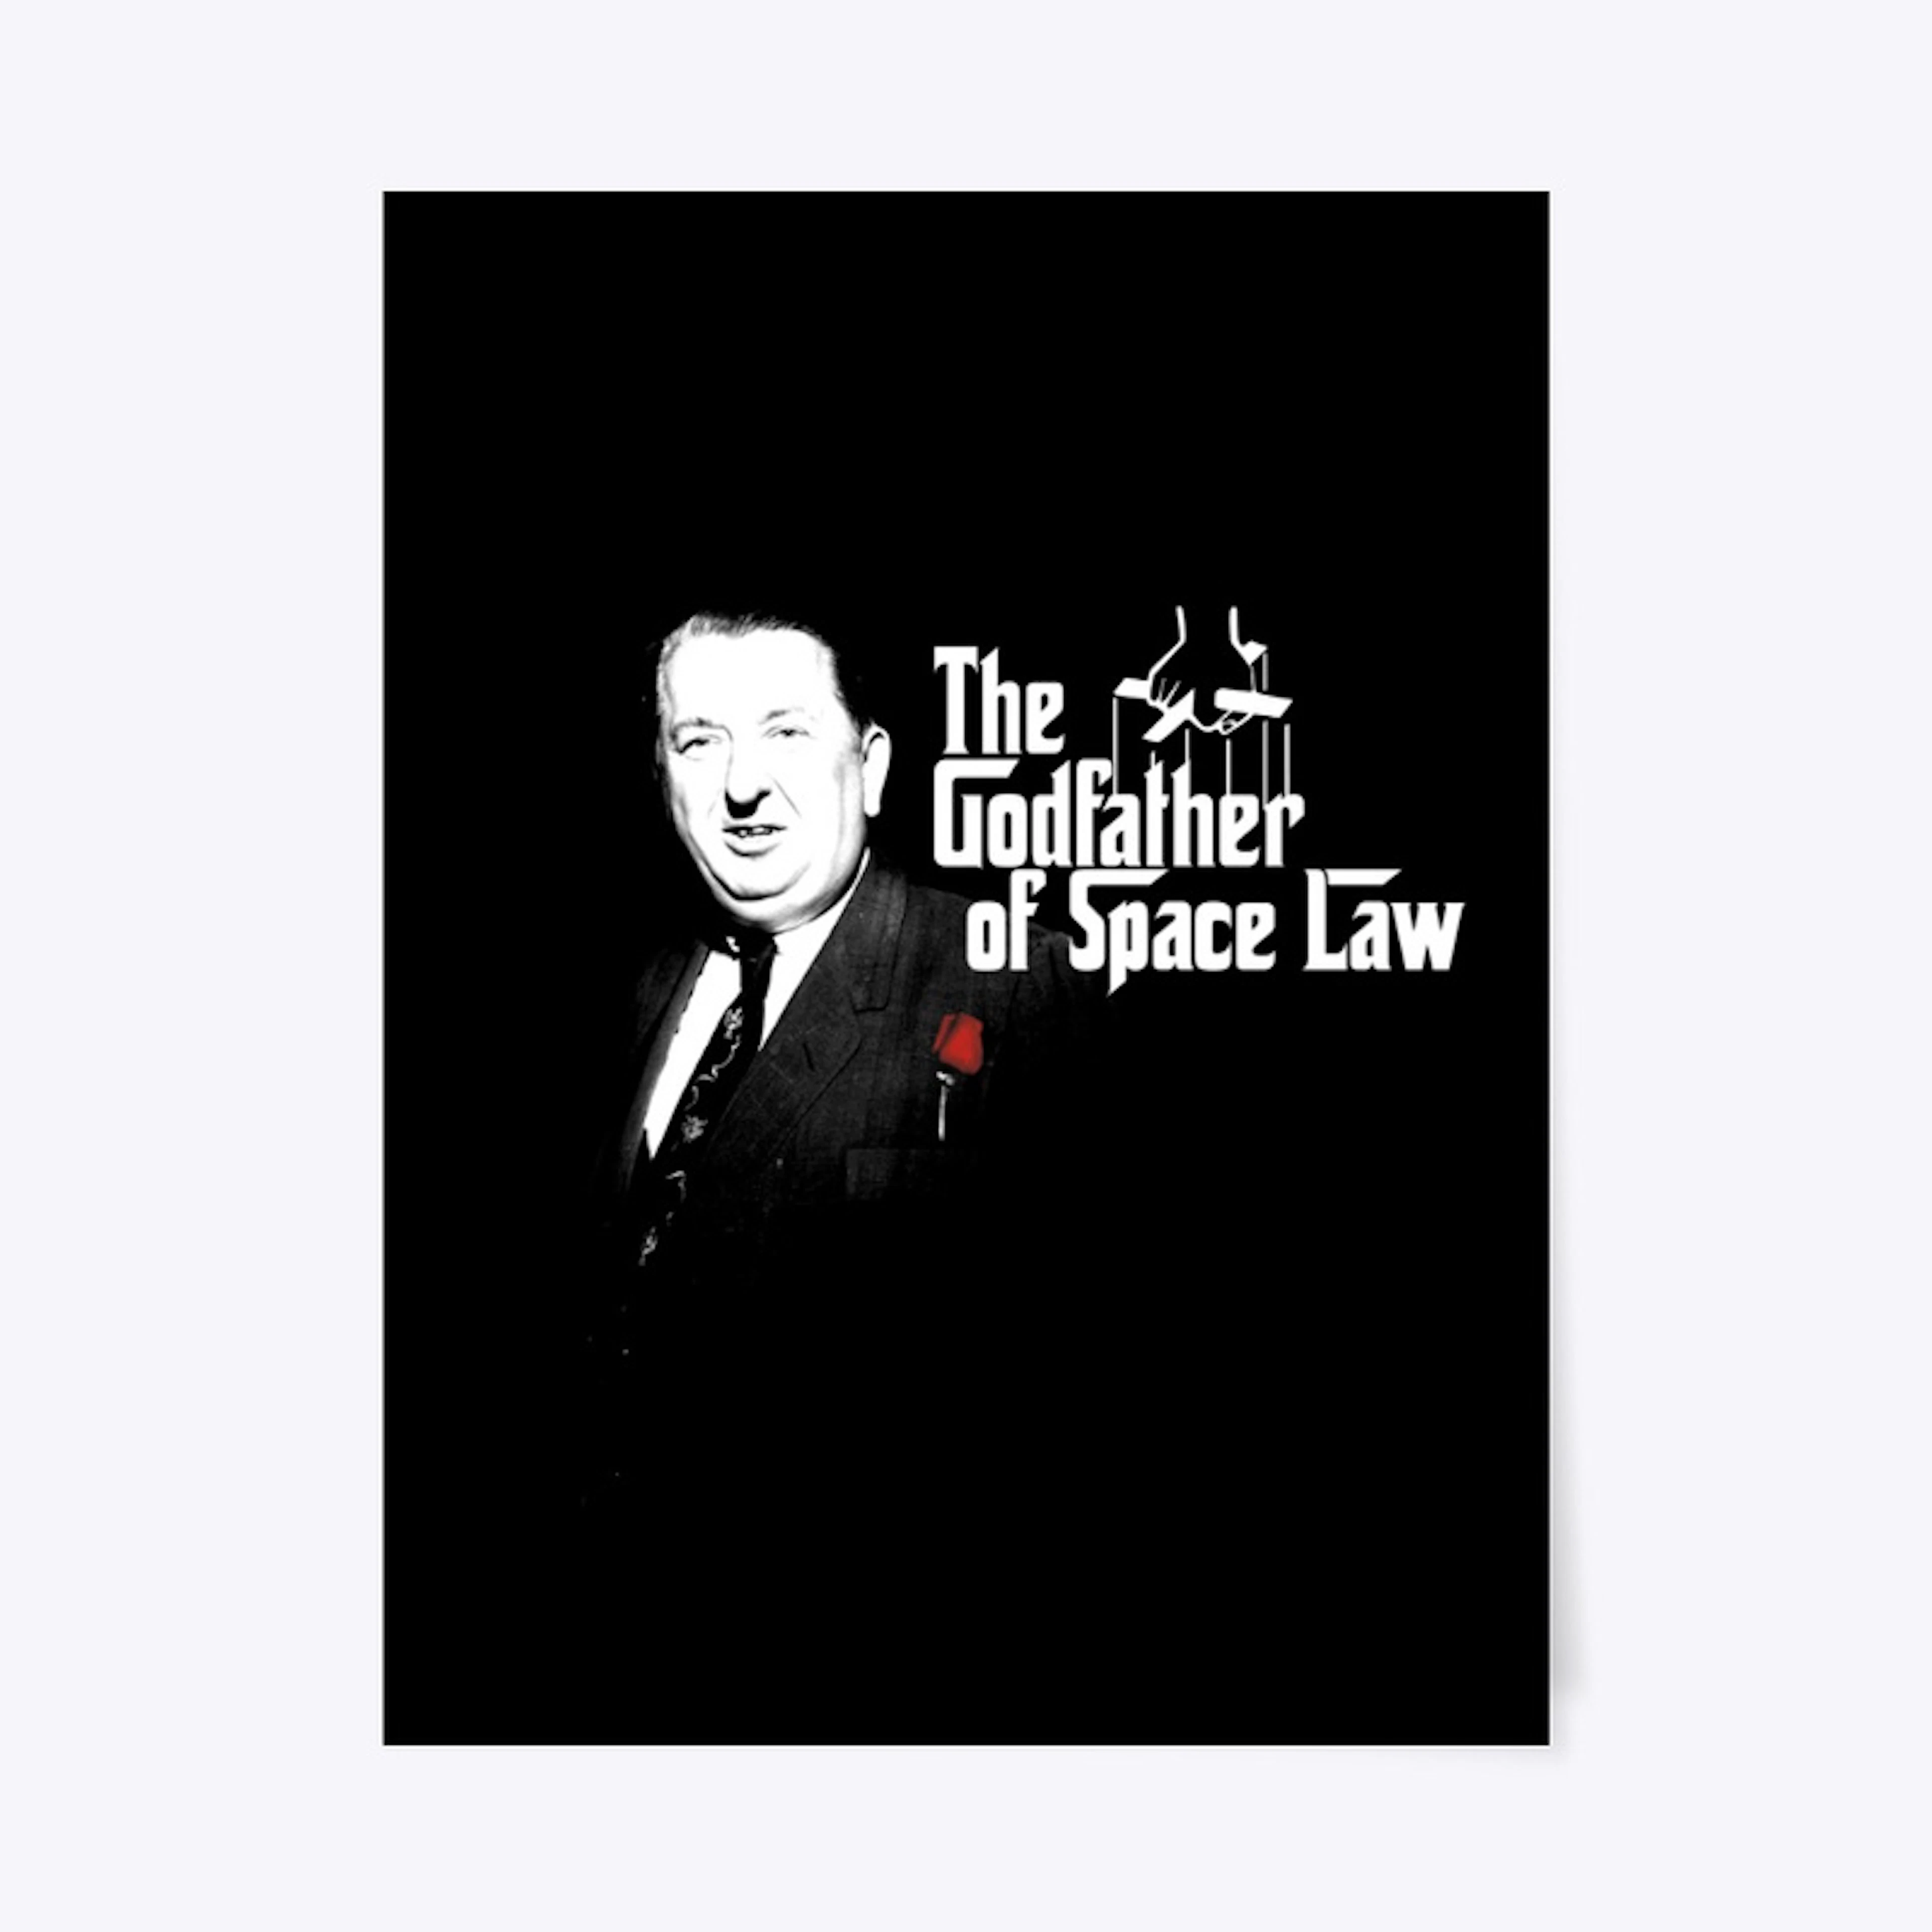 Godfather of Space Law